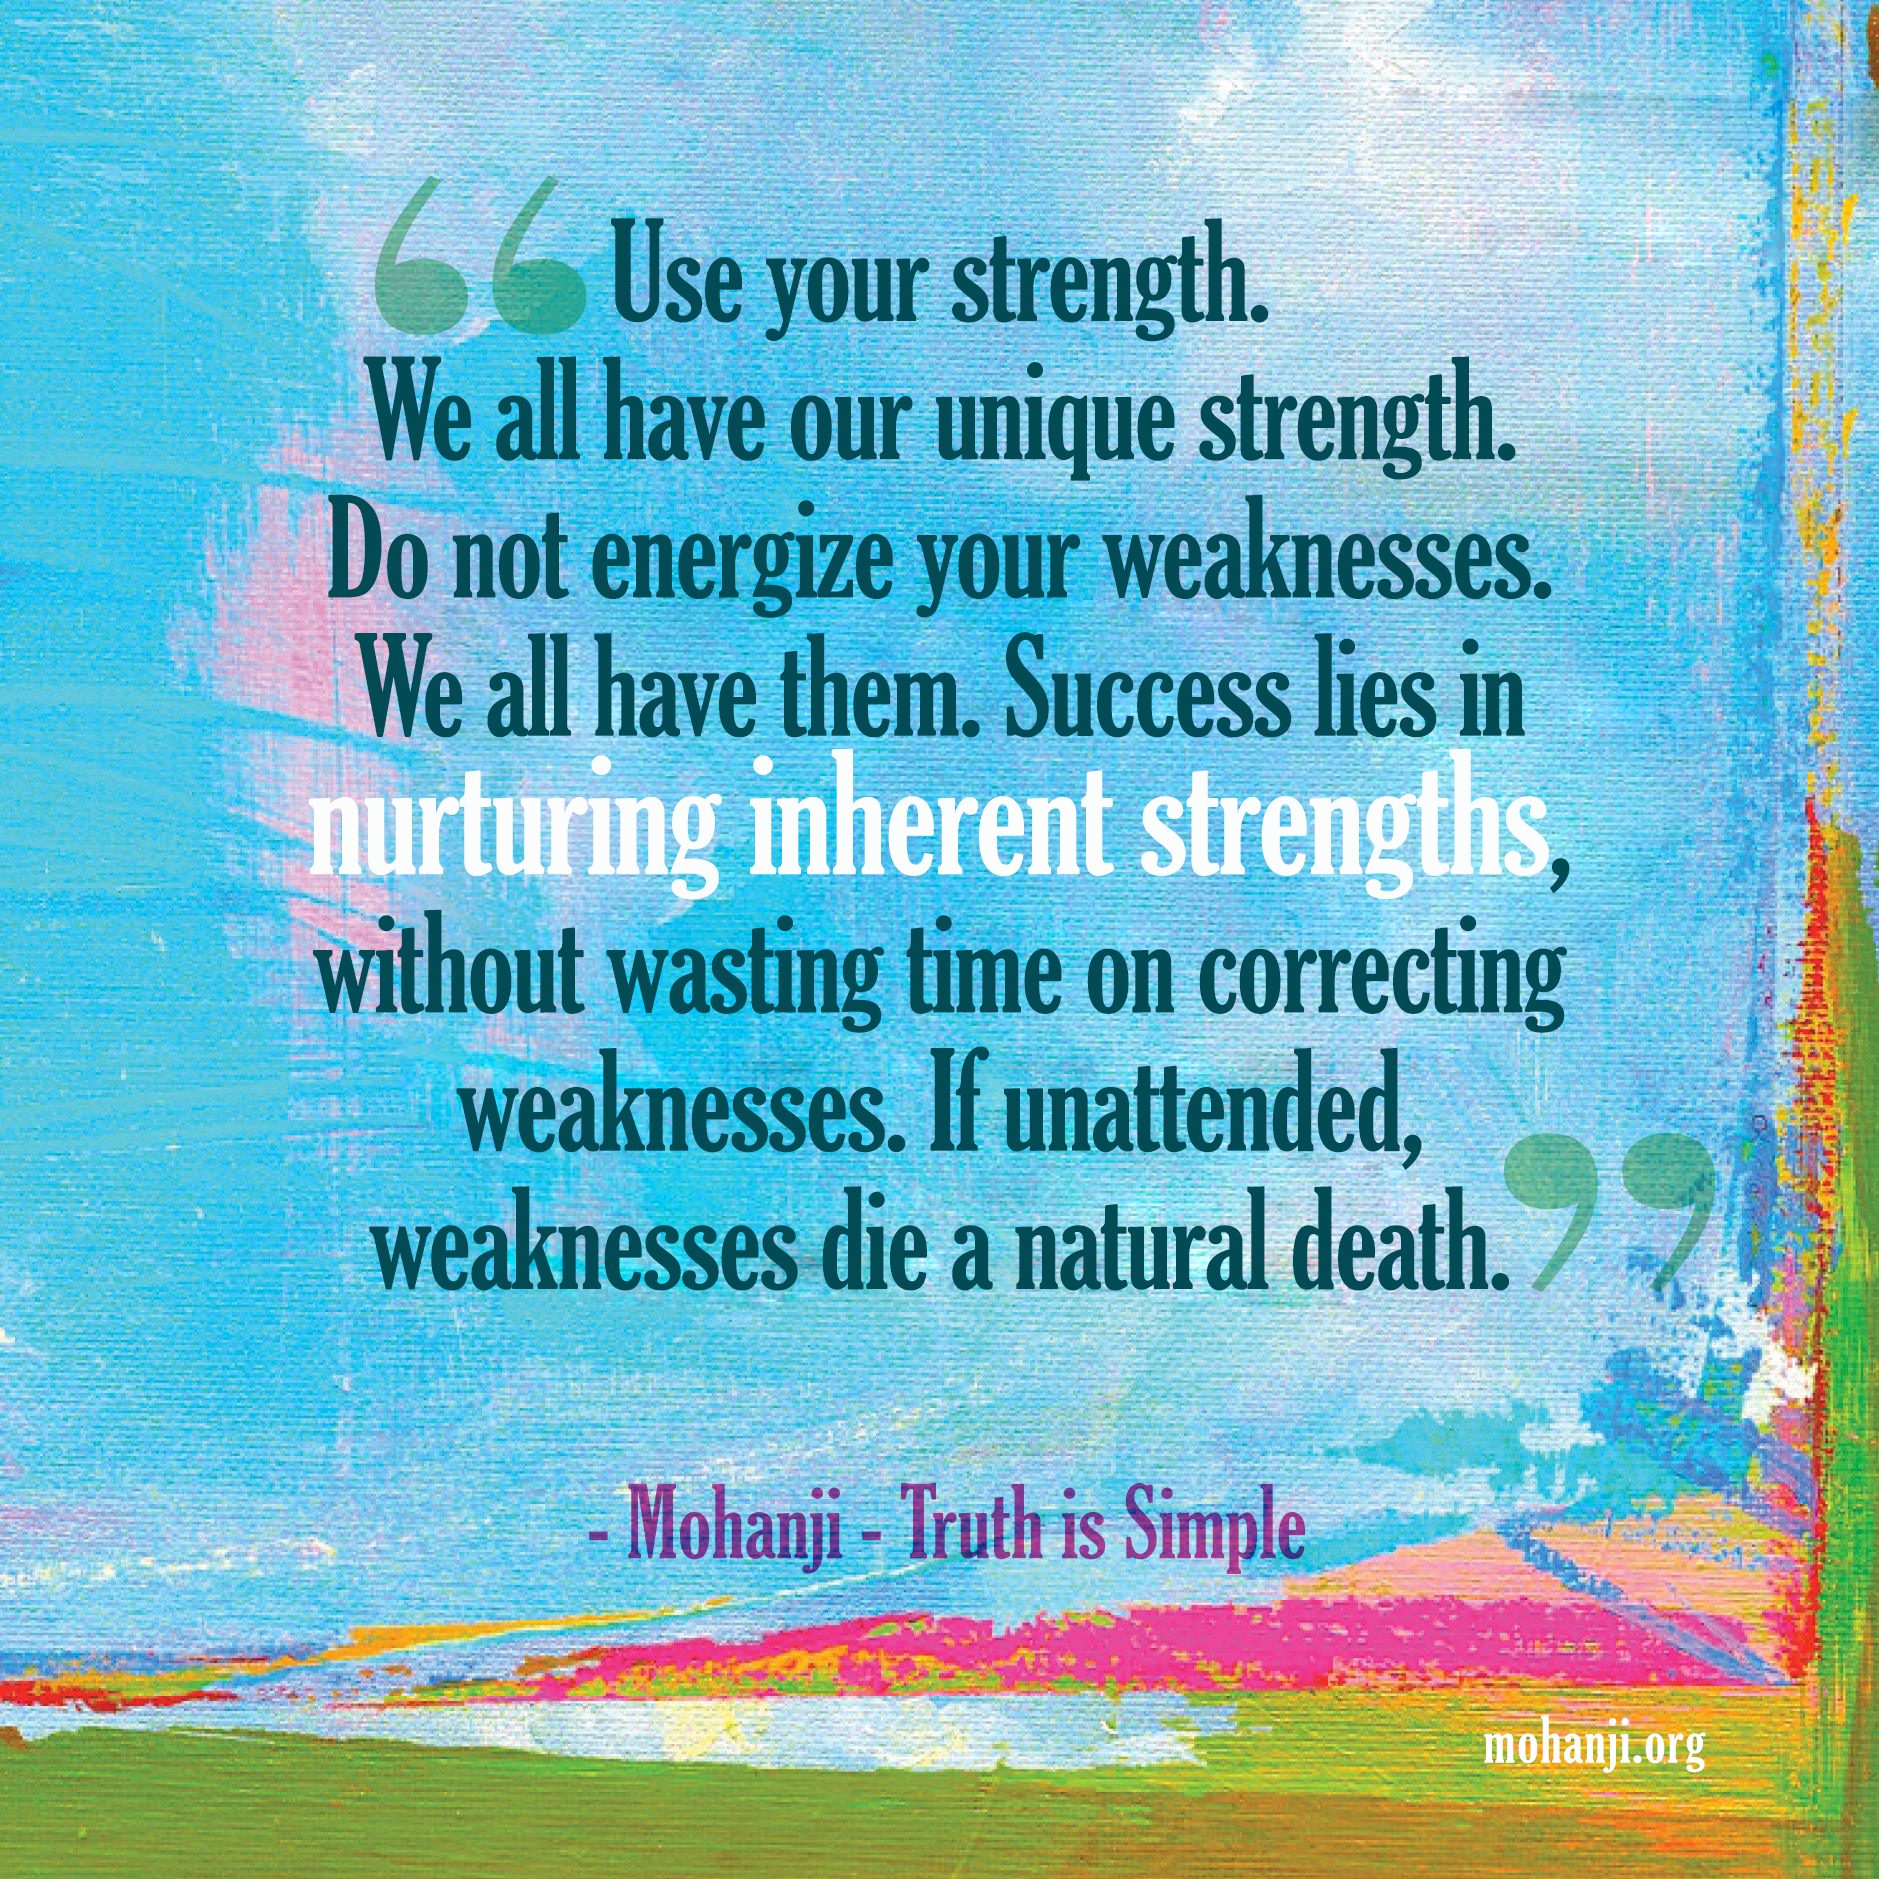 Mohanji quote - Truth is Simple 2